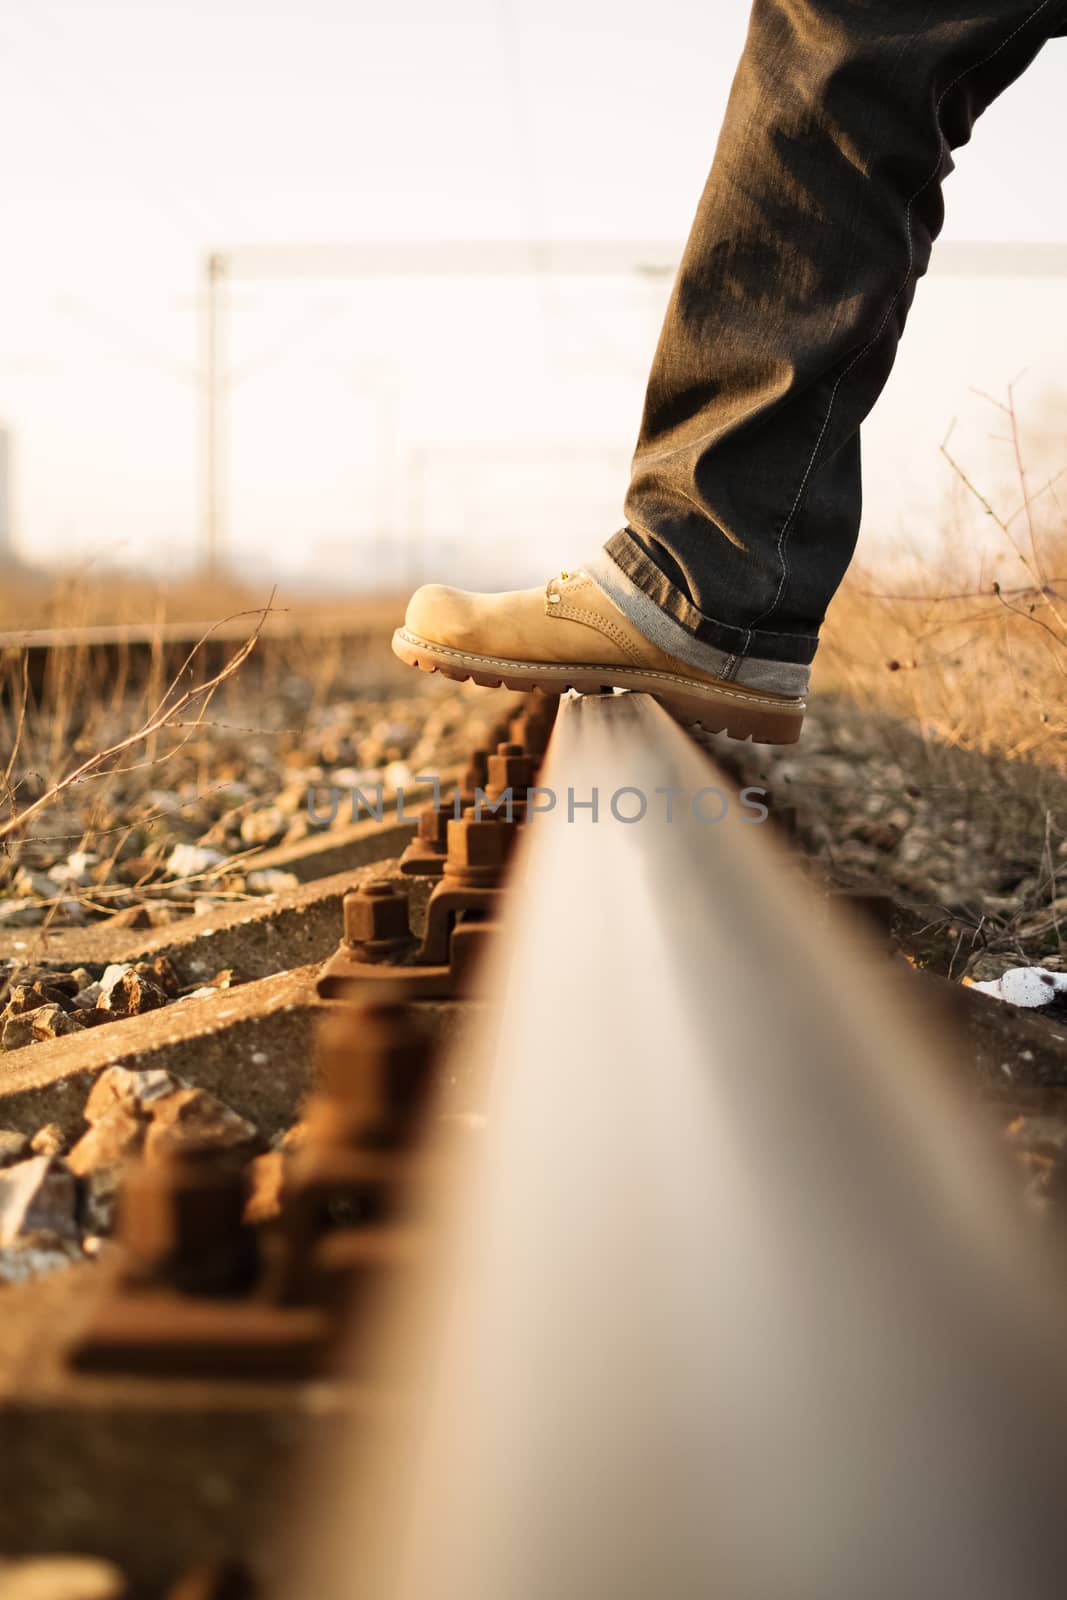 Stepping over the train tracks by Mendelex